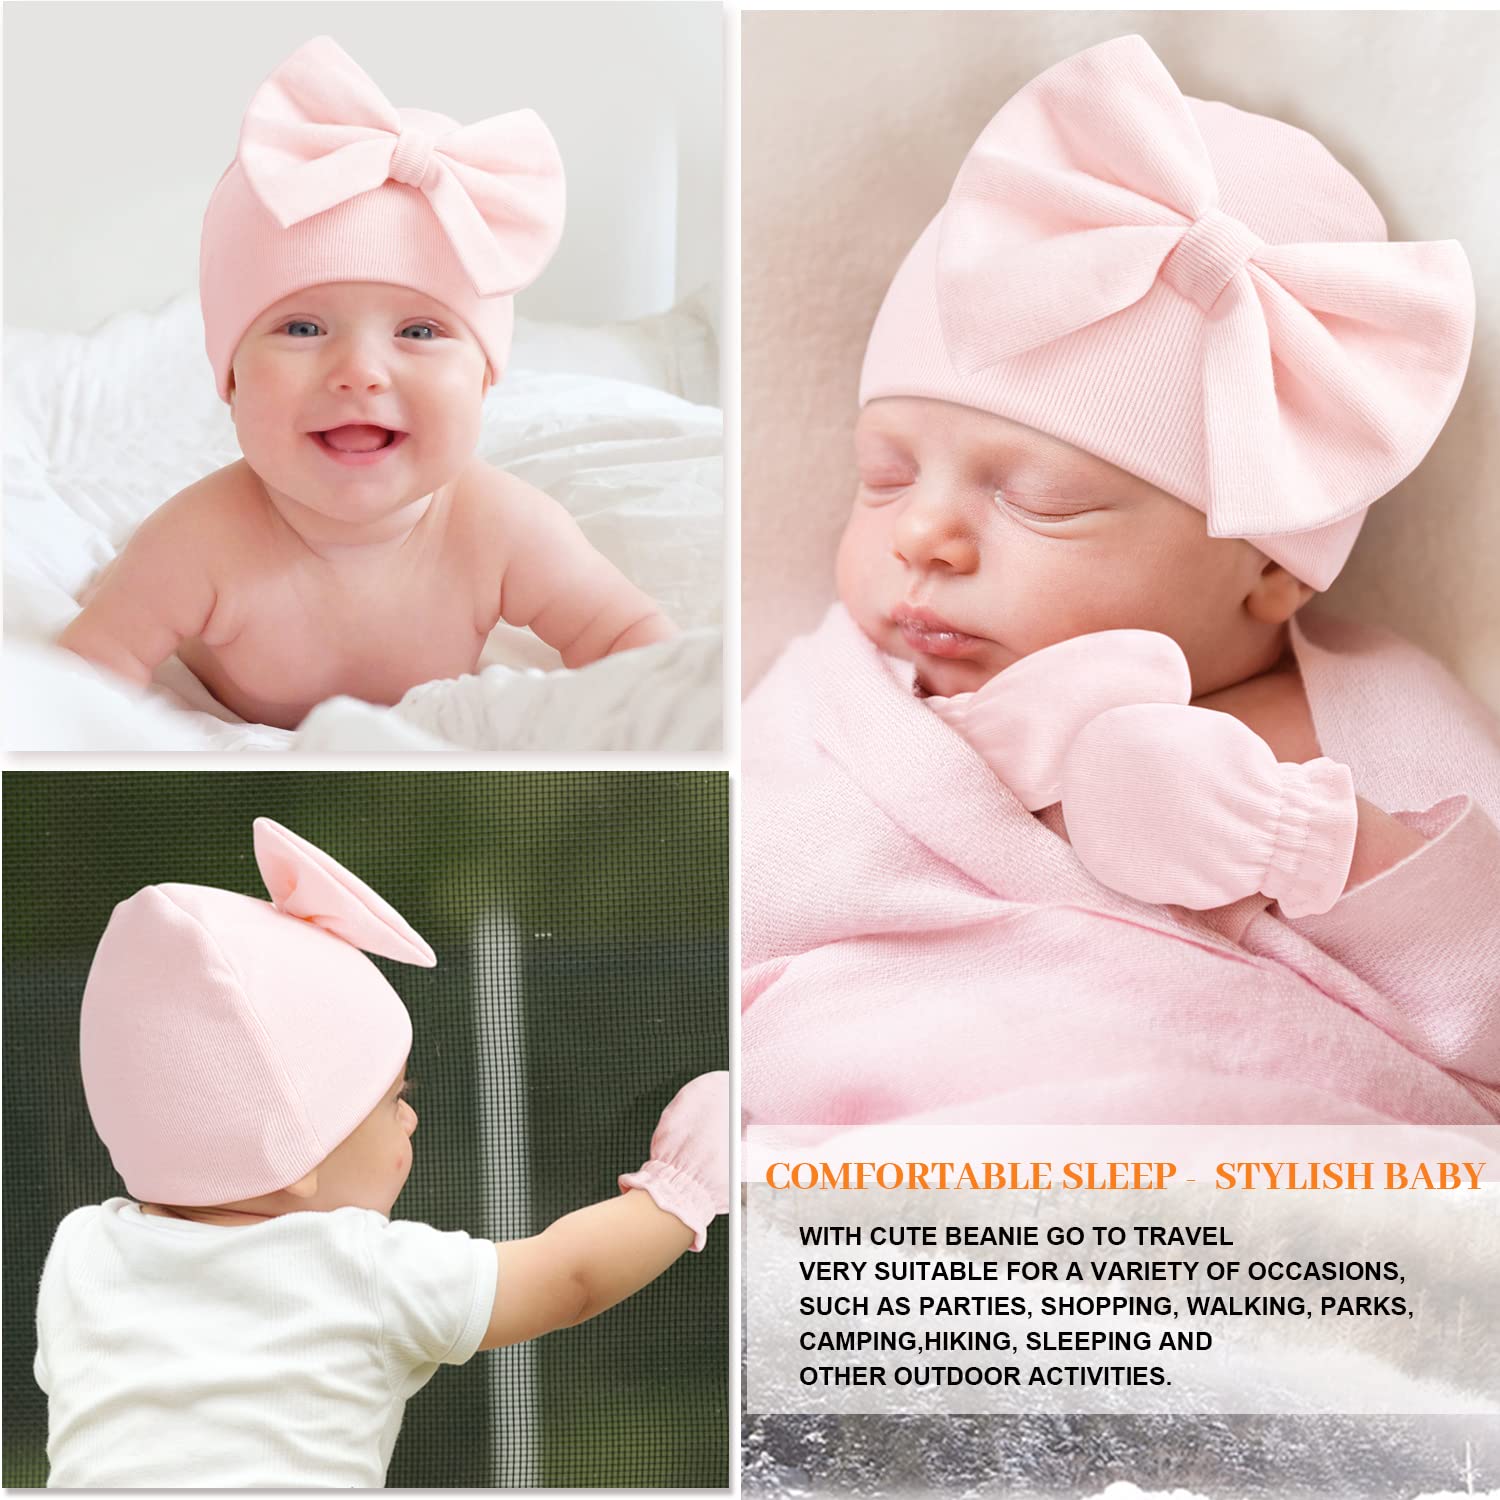 Newborn Hospital Hats Gloves Baby Infant Bow Beanie Cotton Caps No Scratch Hat Mittens Set for 0-6 Months